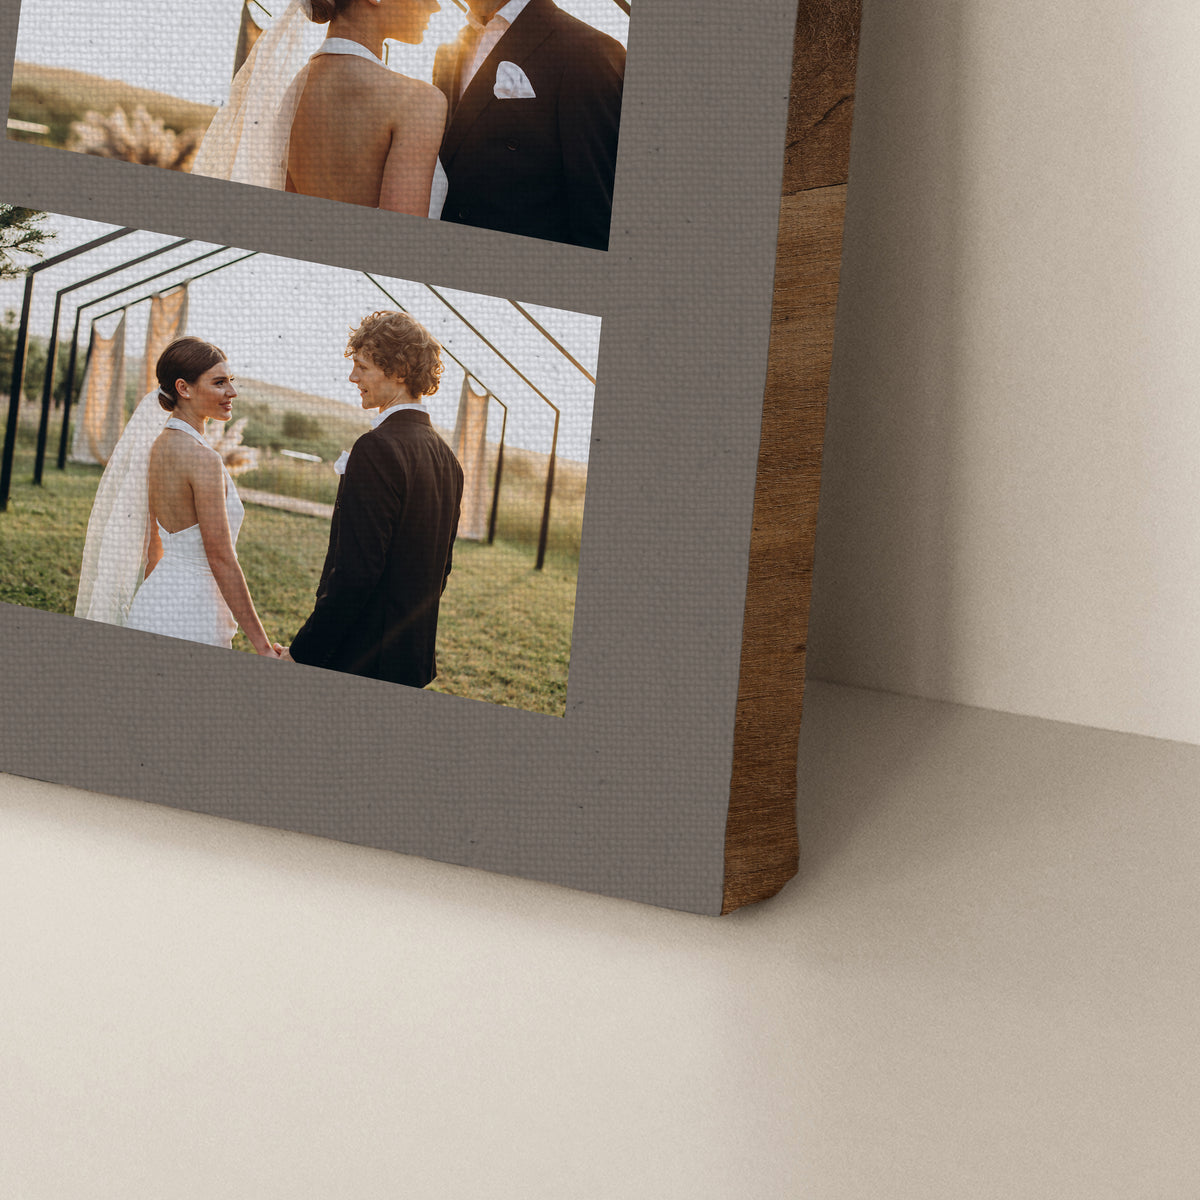 Personalized Pictures to Canvas for Wall, Custom Canvas Prints with Your Photos